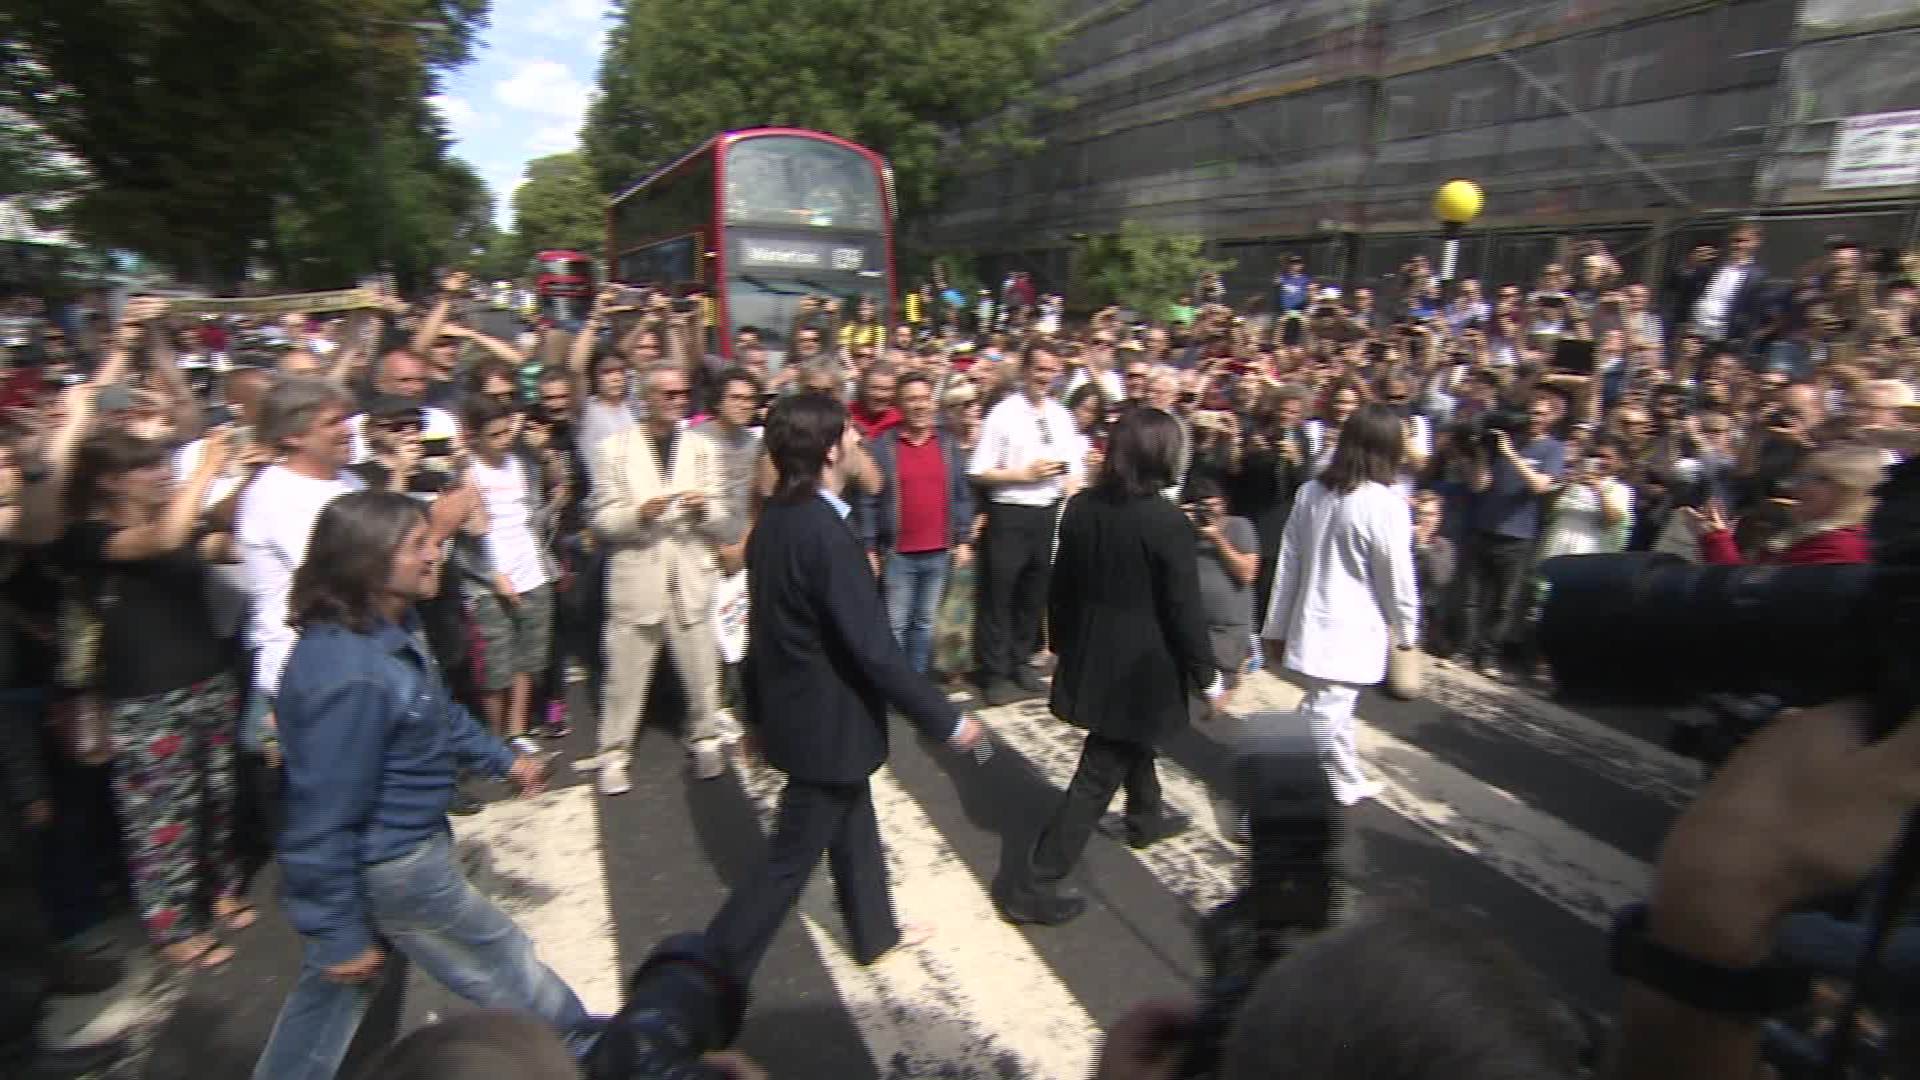 Fans gather for The Beatles' Abbey Road photo on 50th anniversary